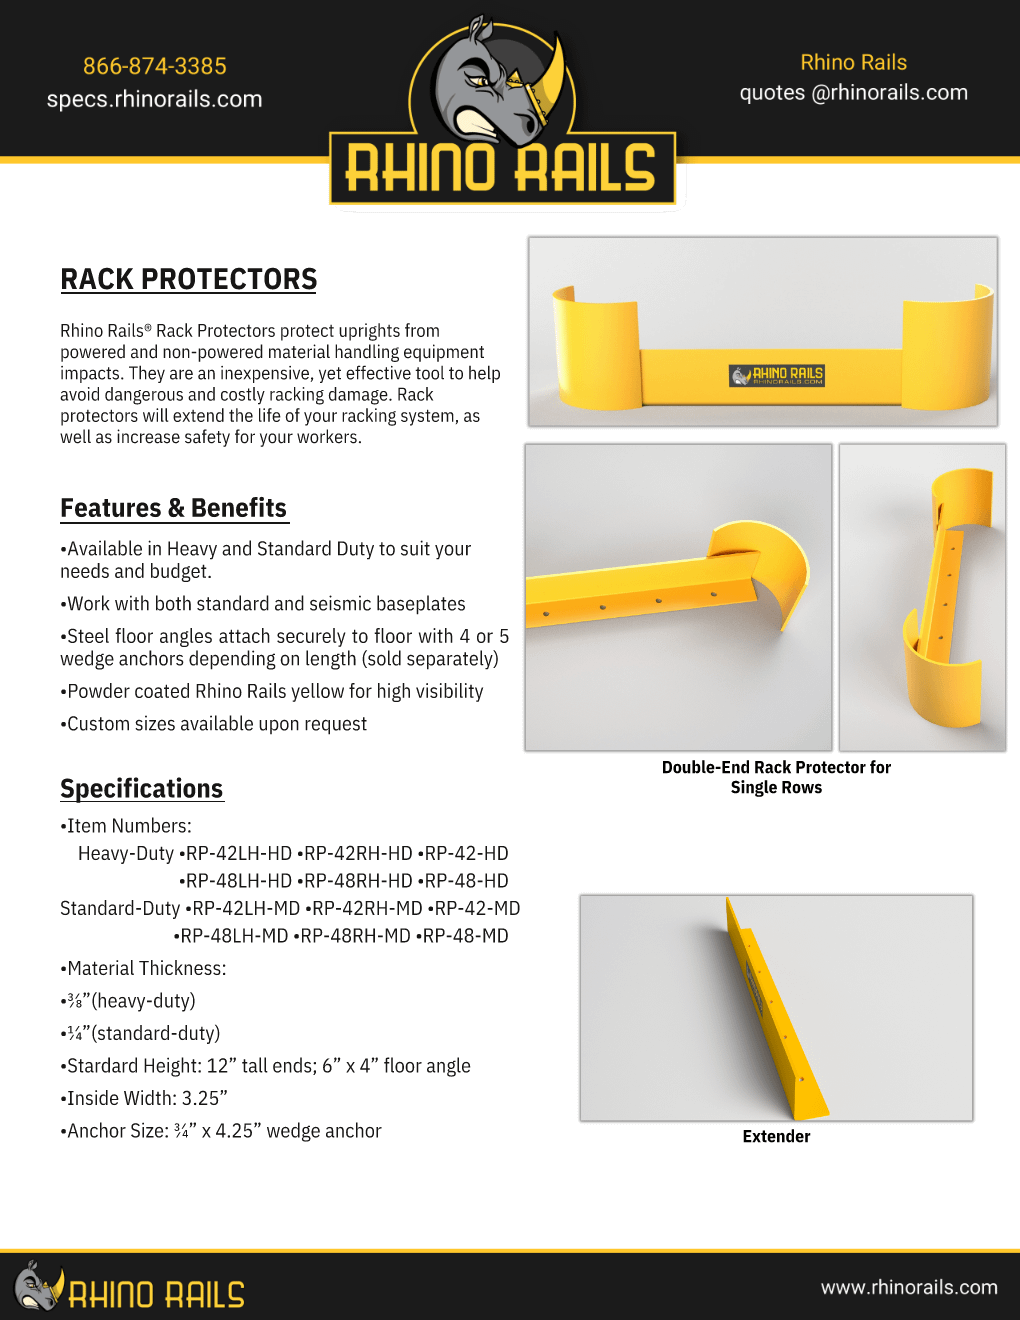 Universal Rack Protector - Product Information Sheet - Photo